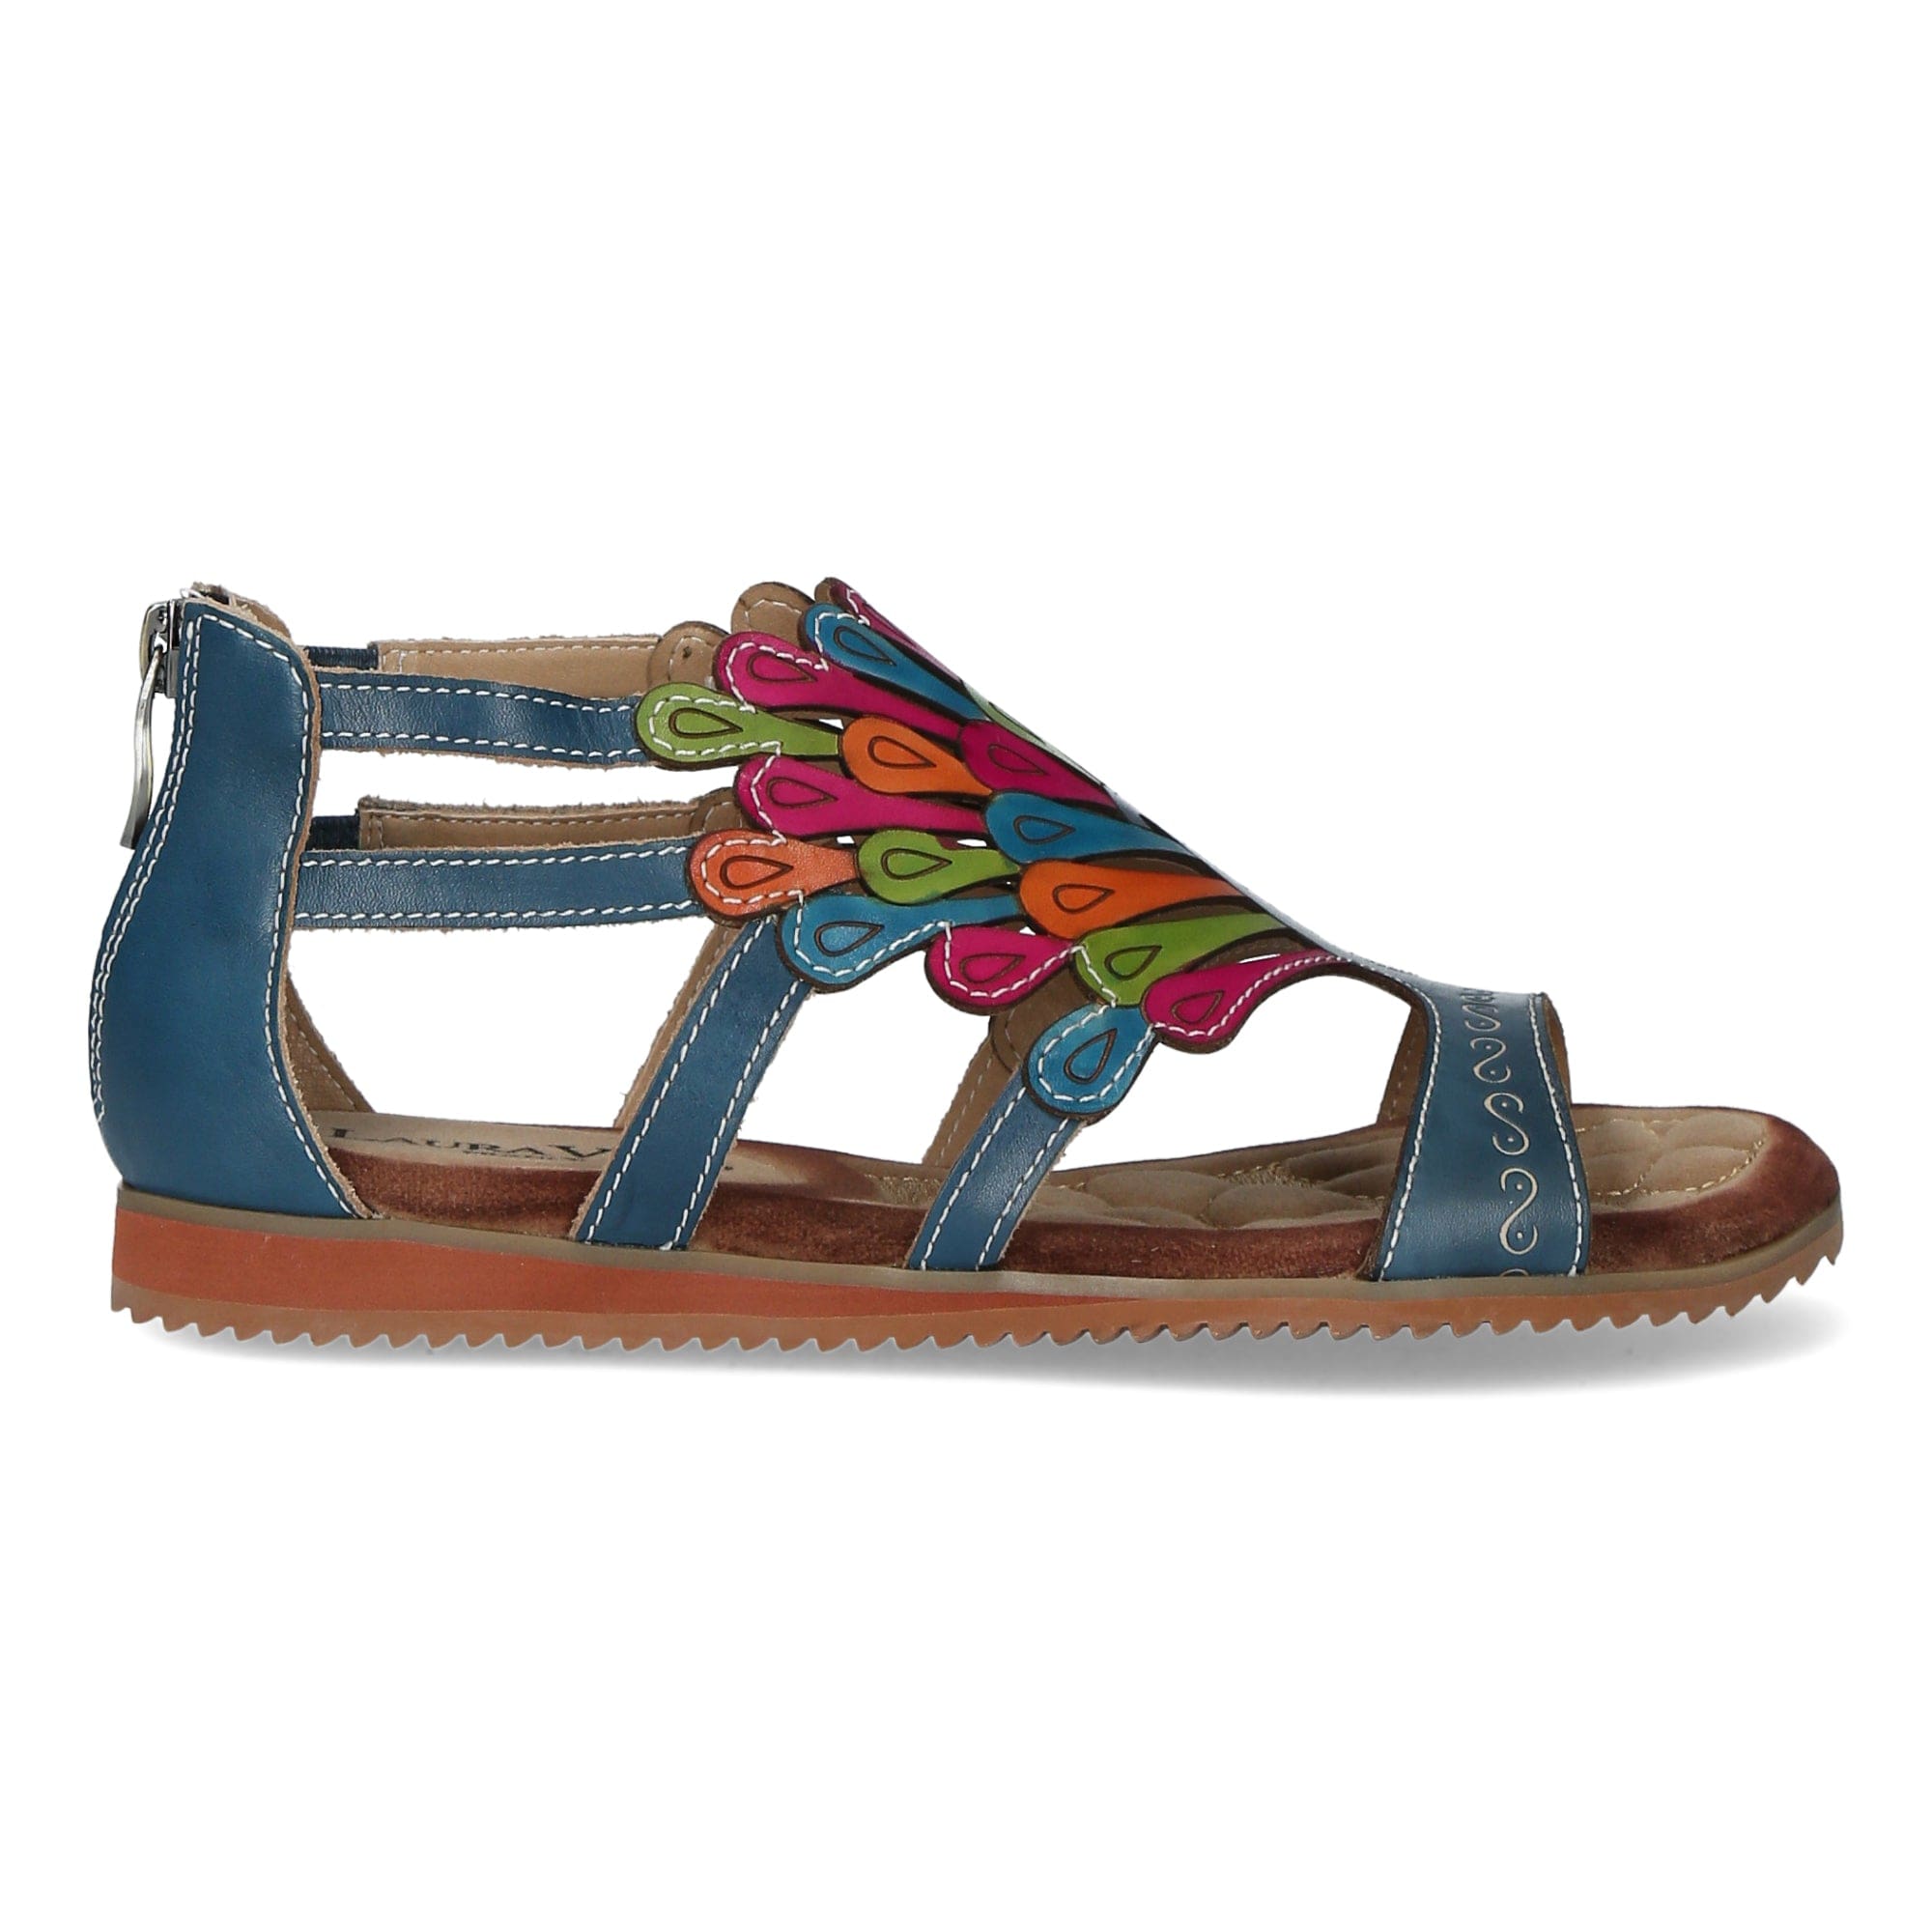 Chaussures VACA - 35 / Jeans - Sandale